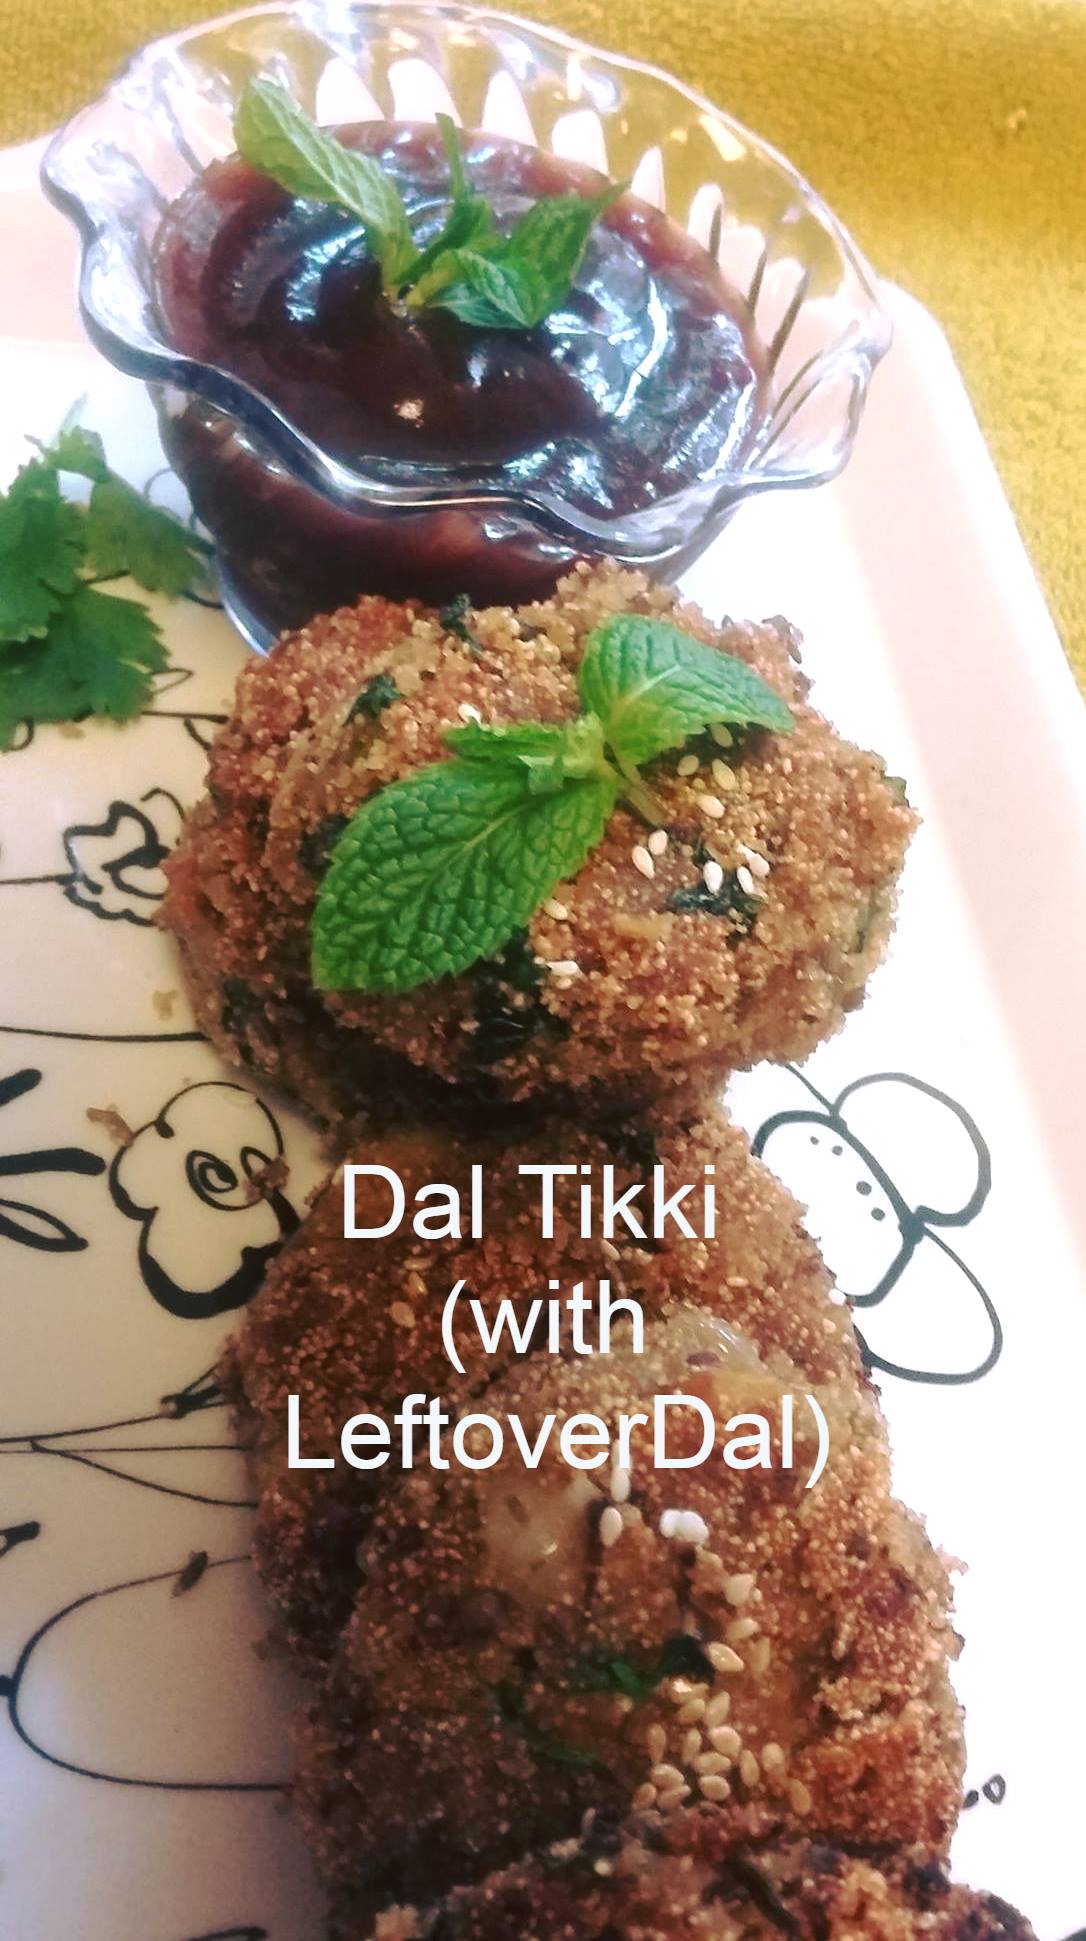 #WFD Dal Tikki with leftover Dal (#Reuse)